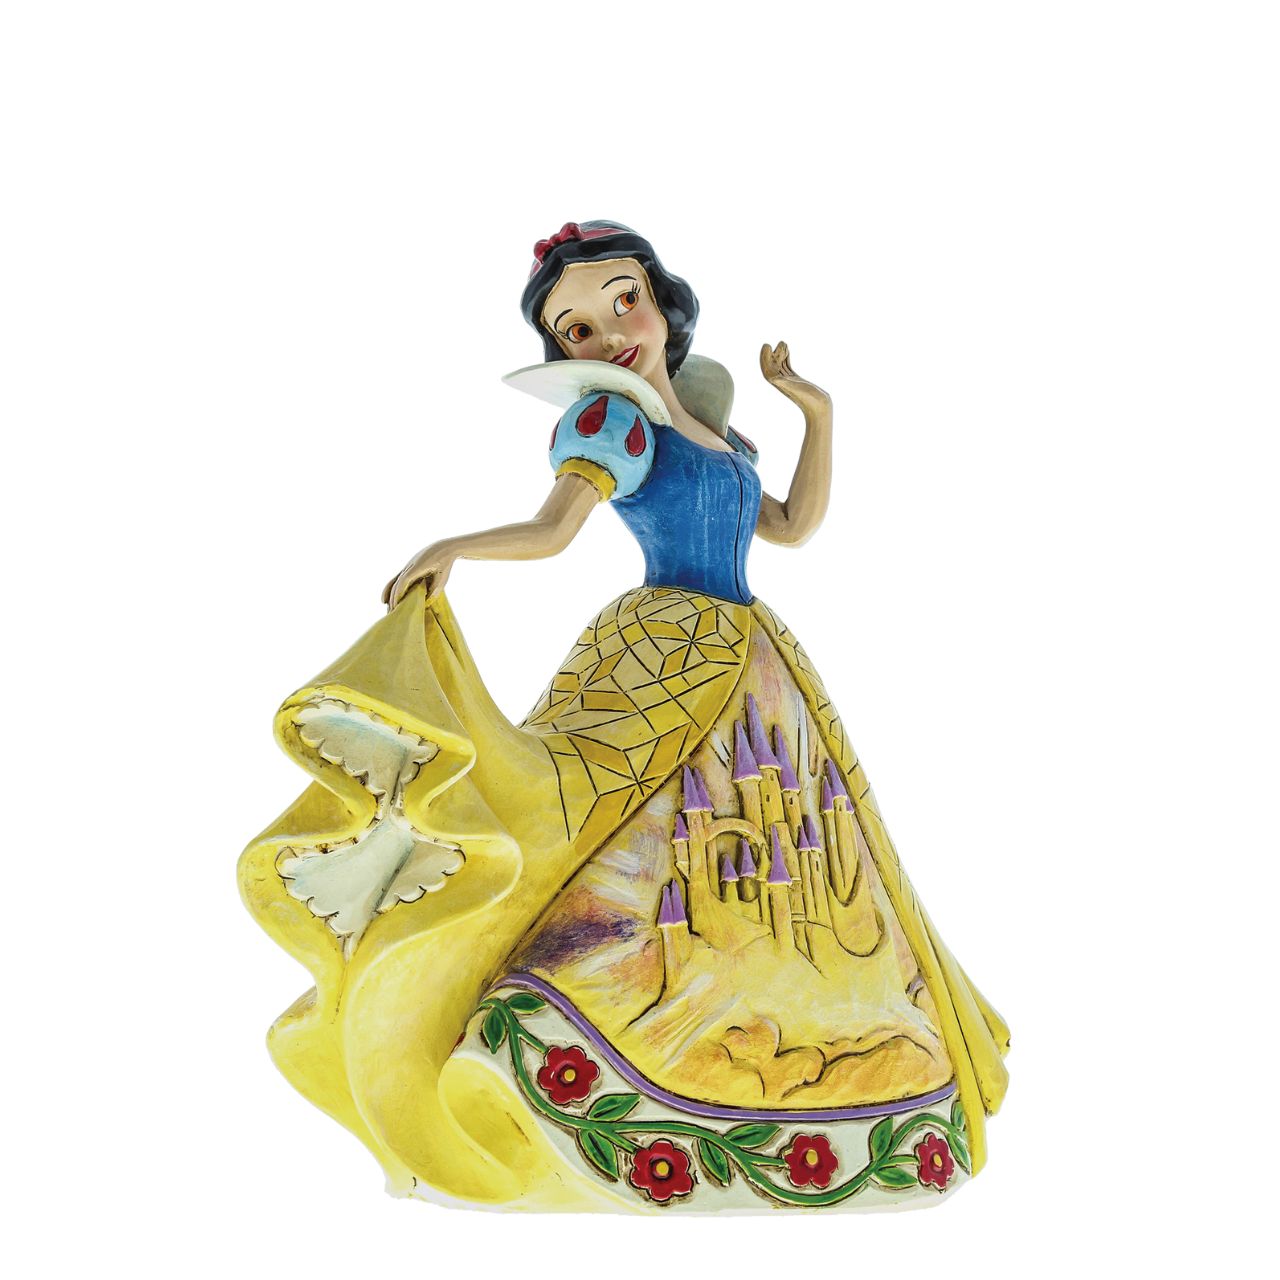 Castles In the Clouds Snow White Figurine  Snow White's Prince did come and escorted her to a majestic castle in the sky. Designed by award winning artist and sculptor, Jim Shore for the Disney Traditions brand. The figurine is made from cast stone.